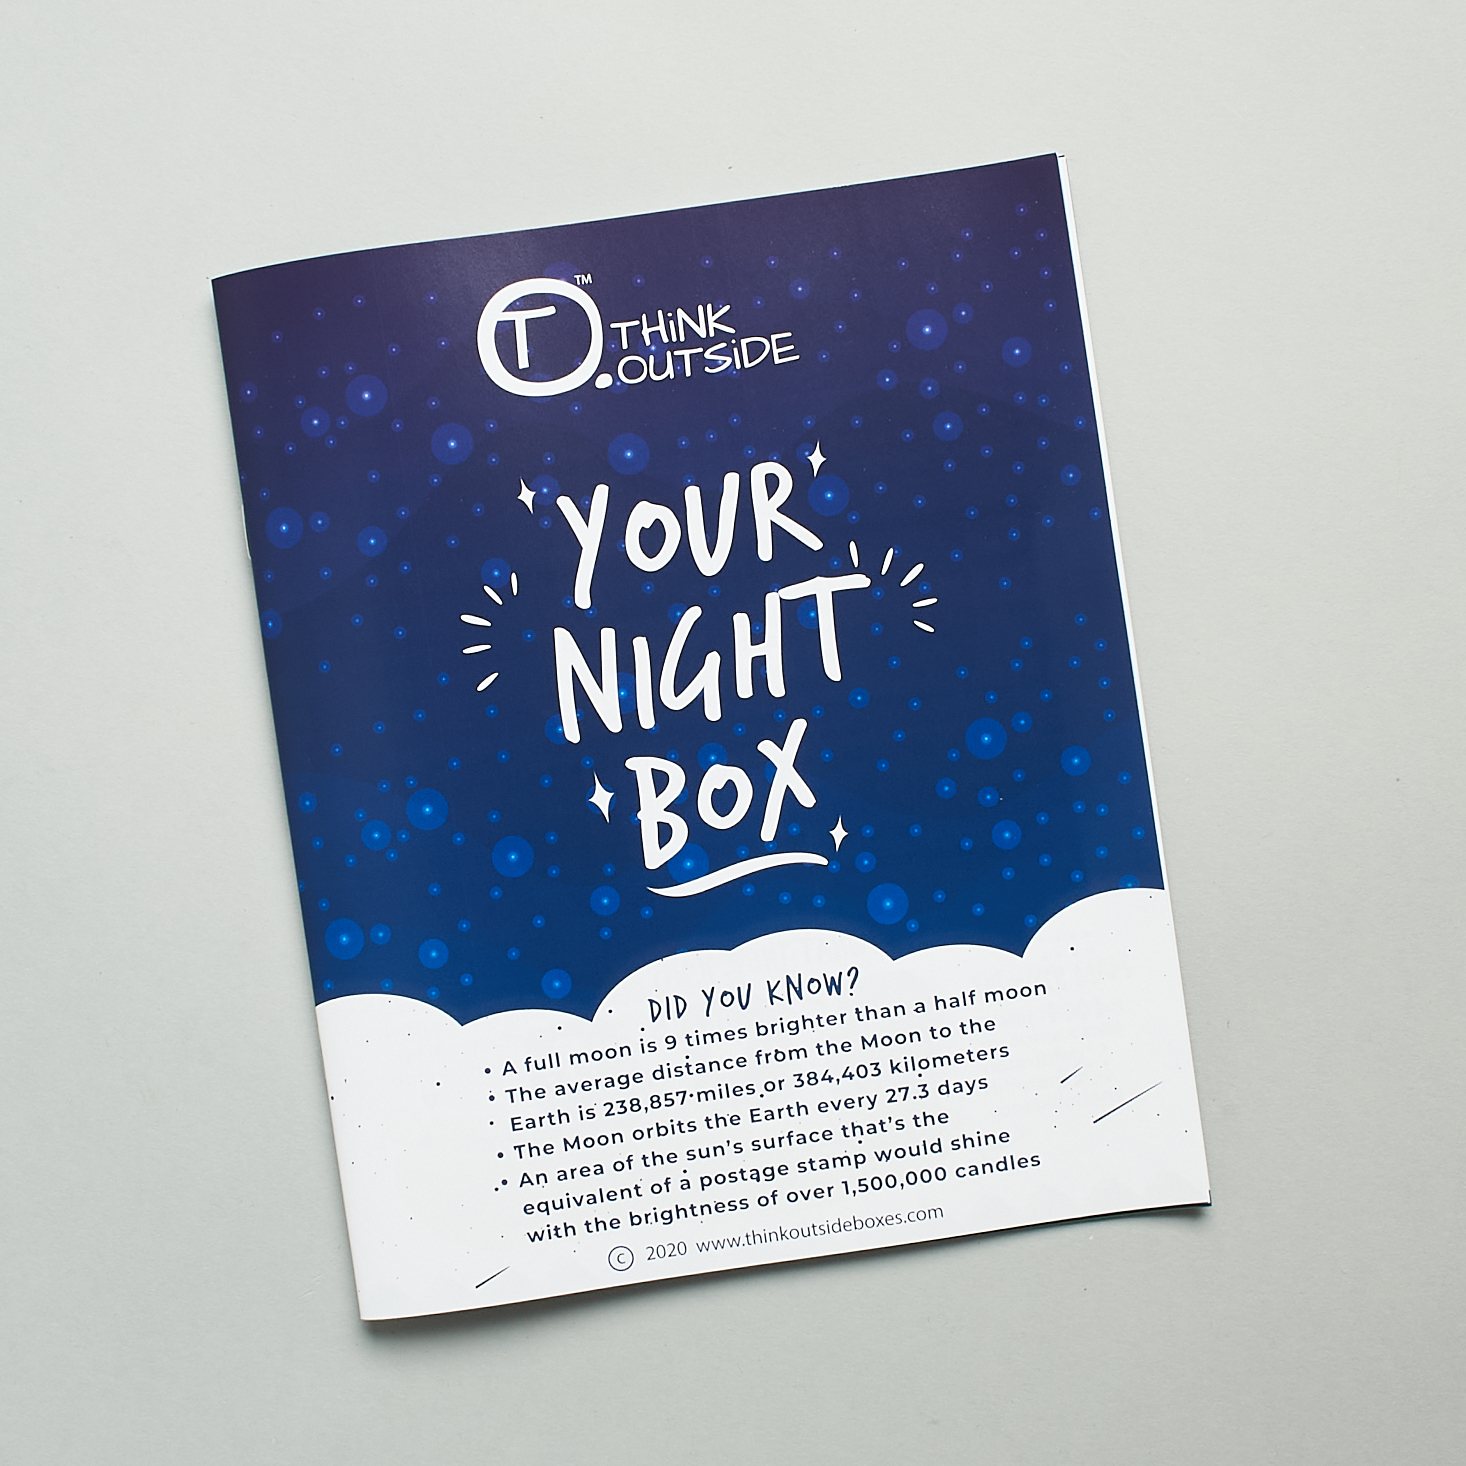 think outside box pamphlet